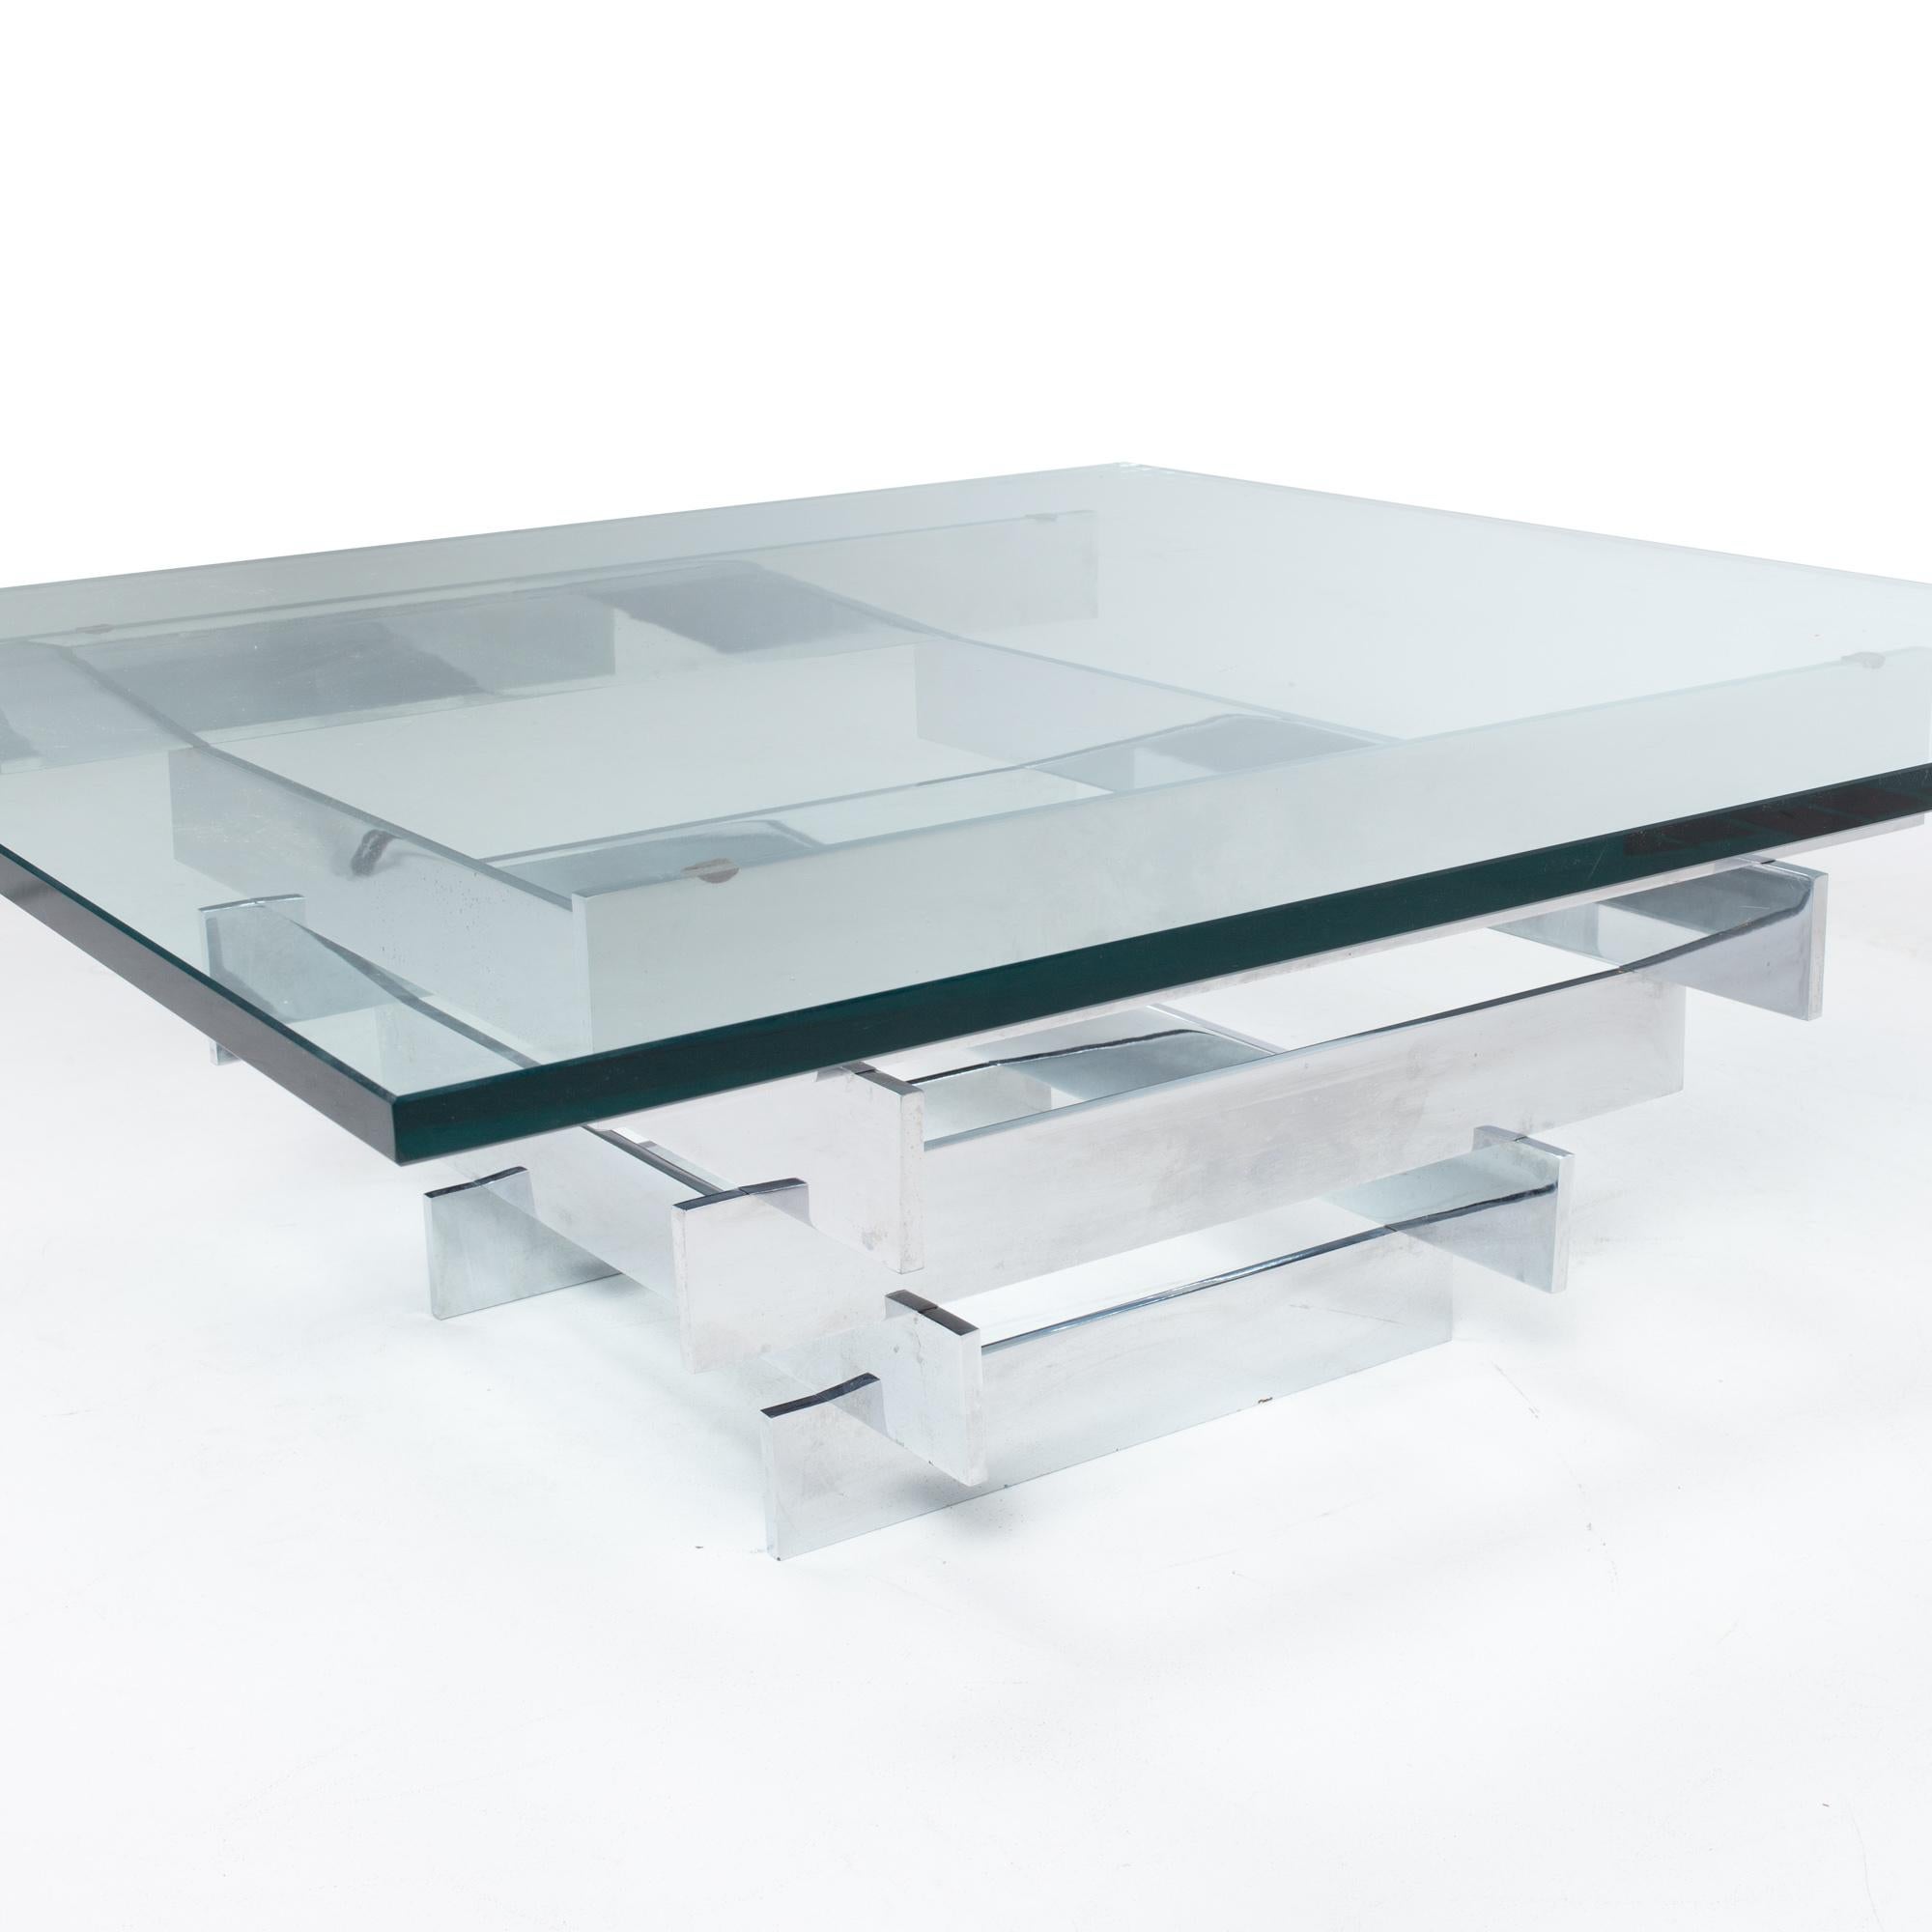 American Paul Mayen for Habitat Midcentury Chrome and Glass Coffee Table For Sale